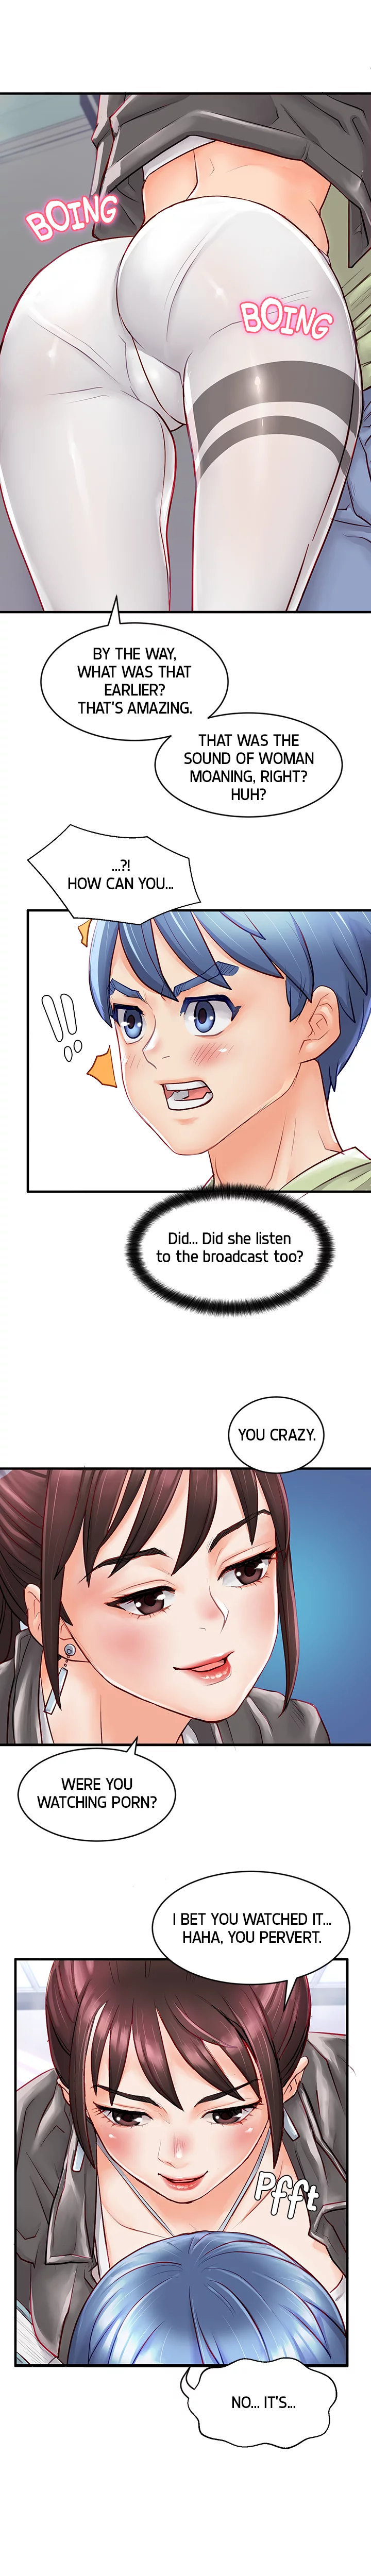 Love Is On The Air - Chapter 2 Page 11